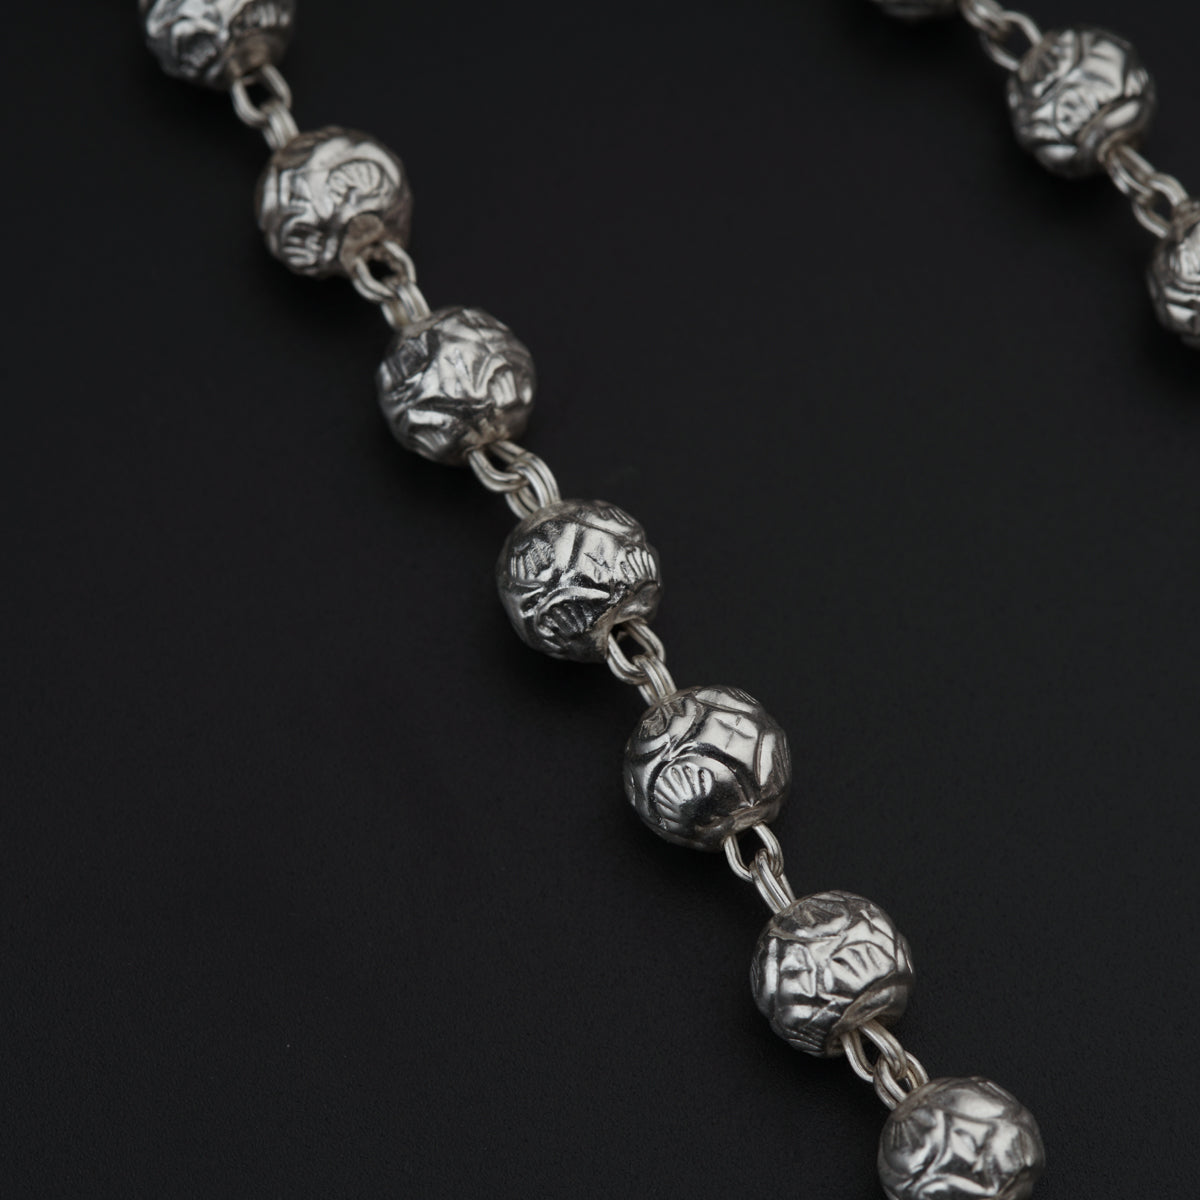 a close up of a silver chain on a black surface